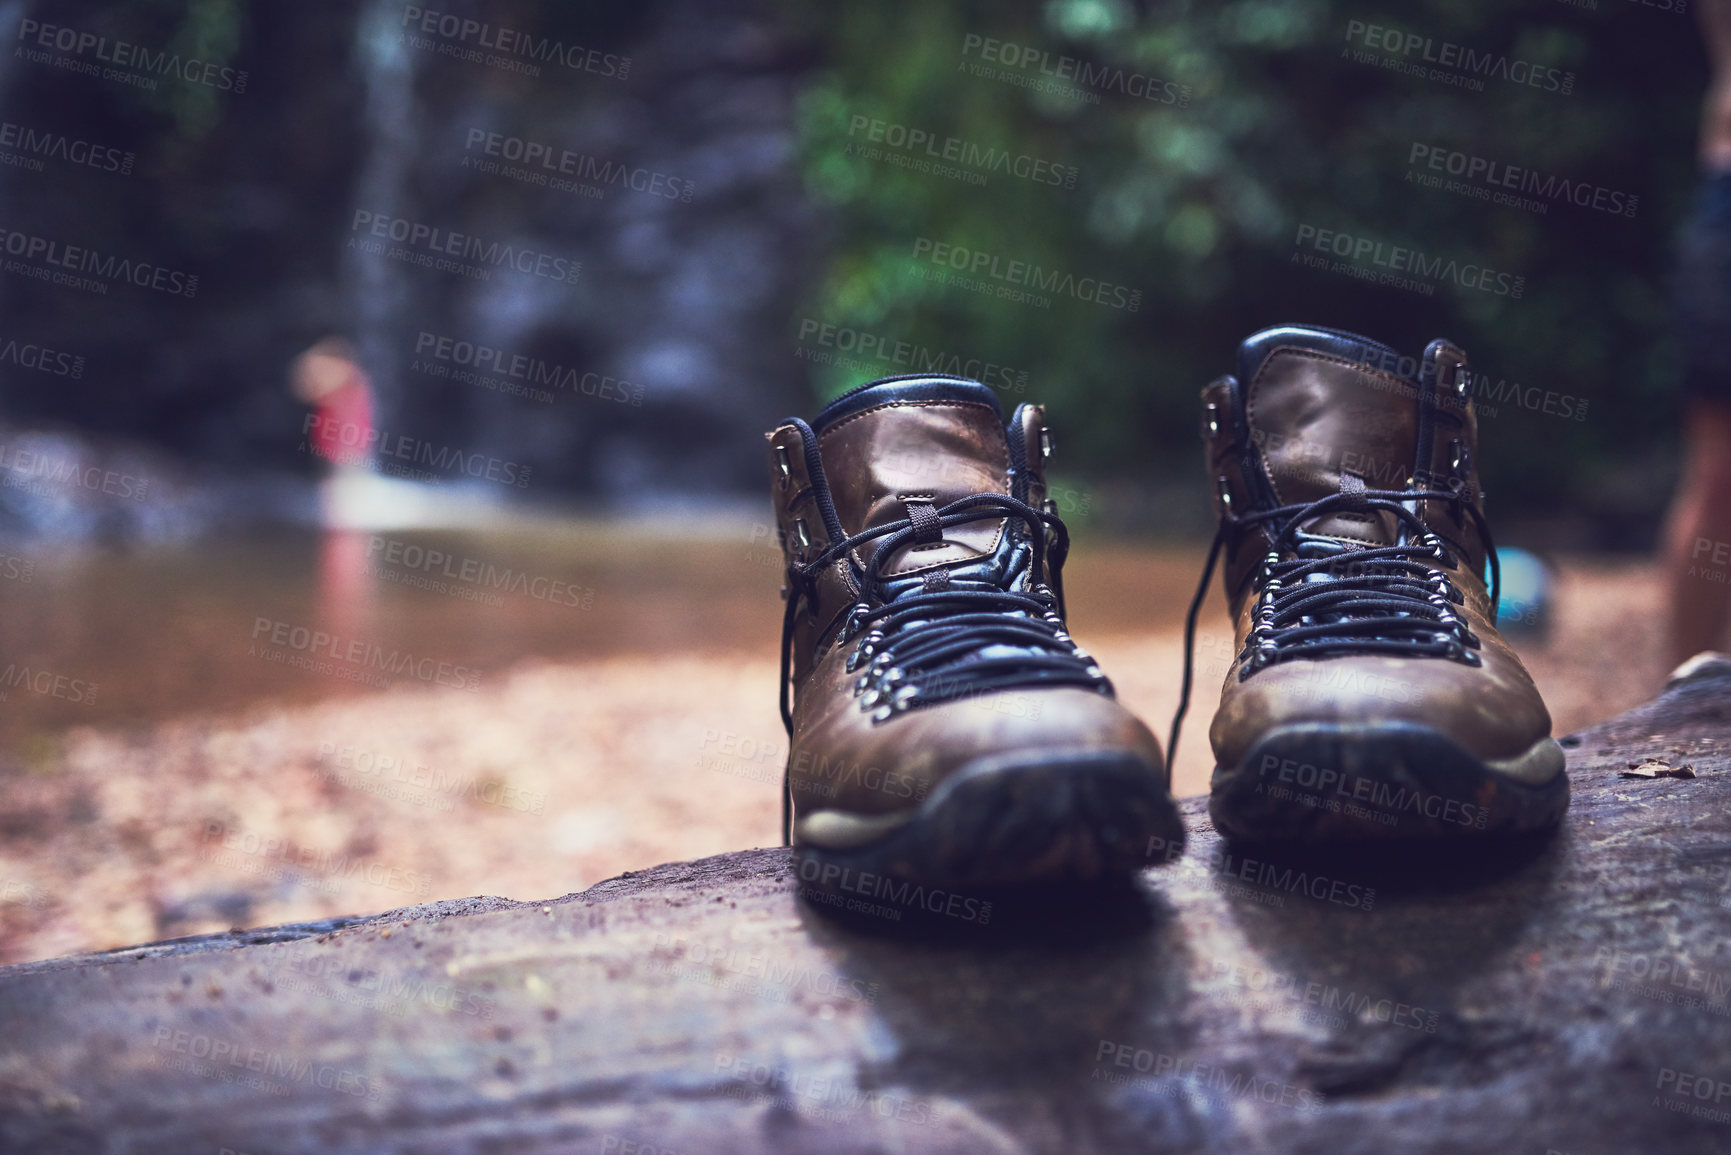 Buy stock photo Shot of a pair of empty shoes standing on a log by a river in a jungle